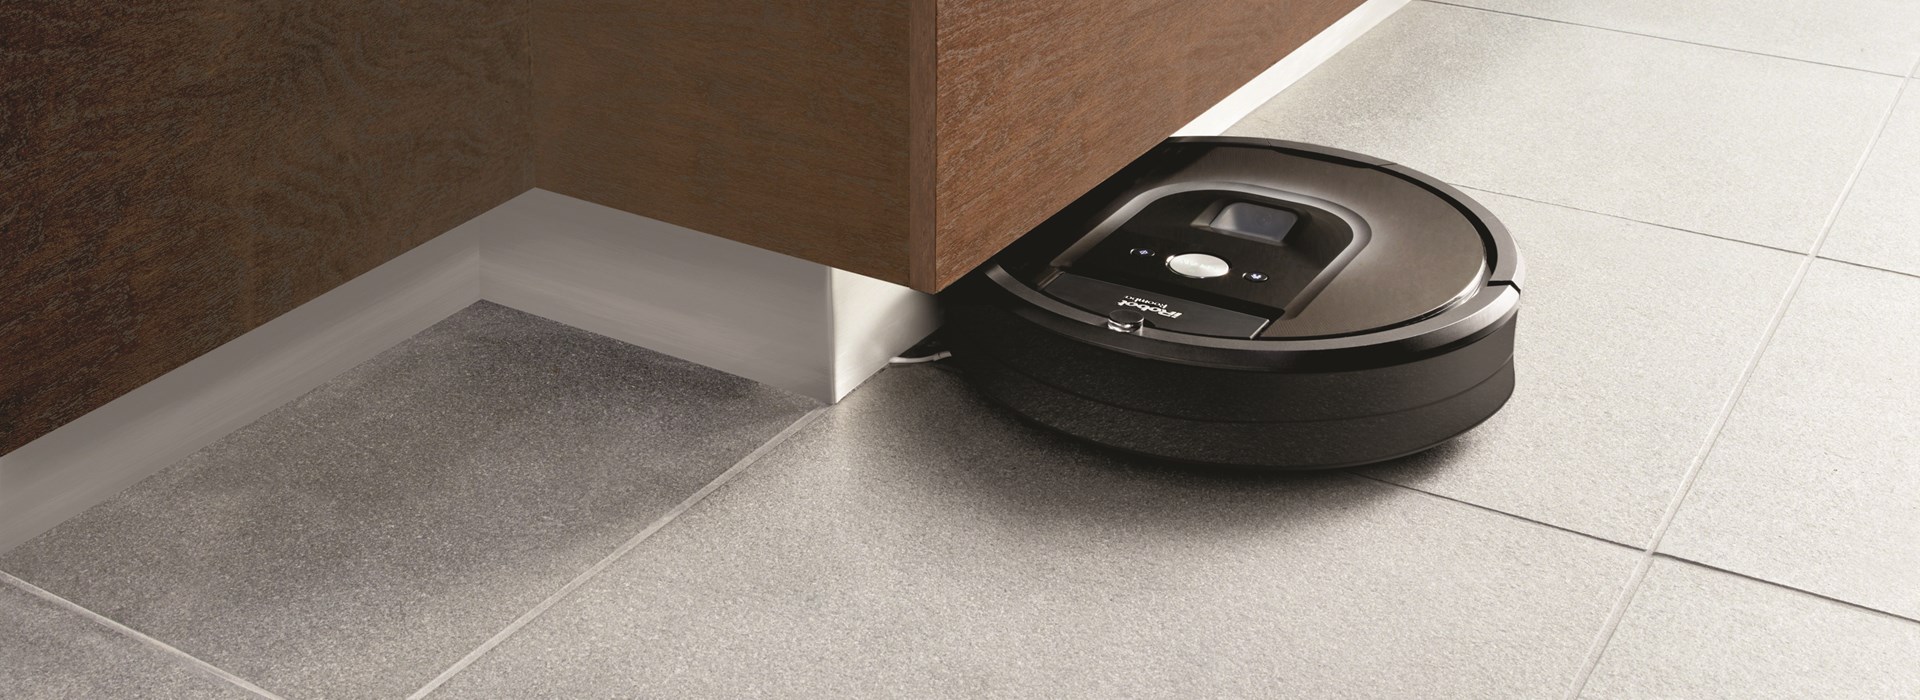 Roomba vacuum cleaner under counter top in kitchen